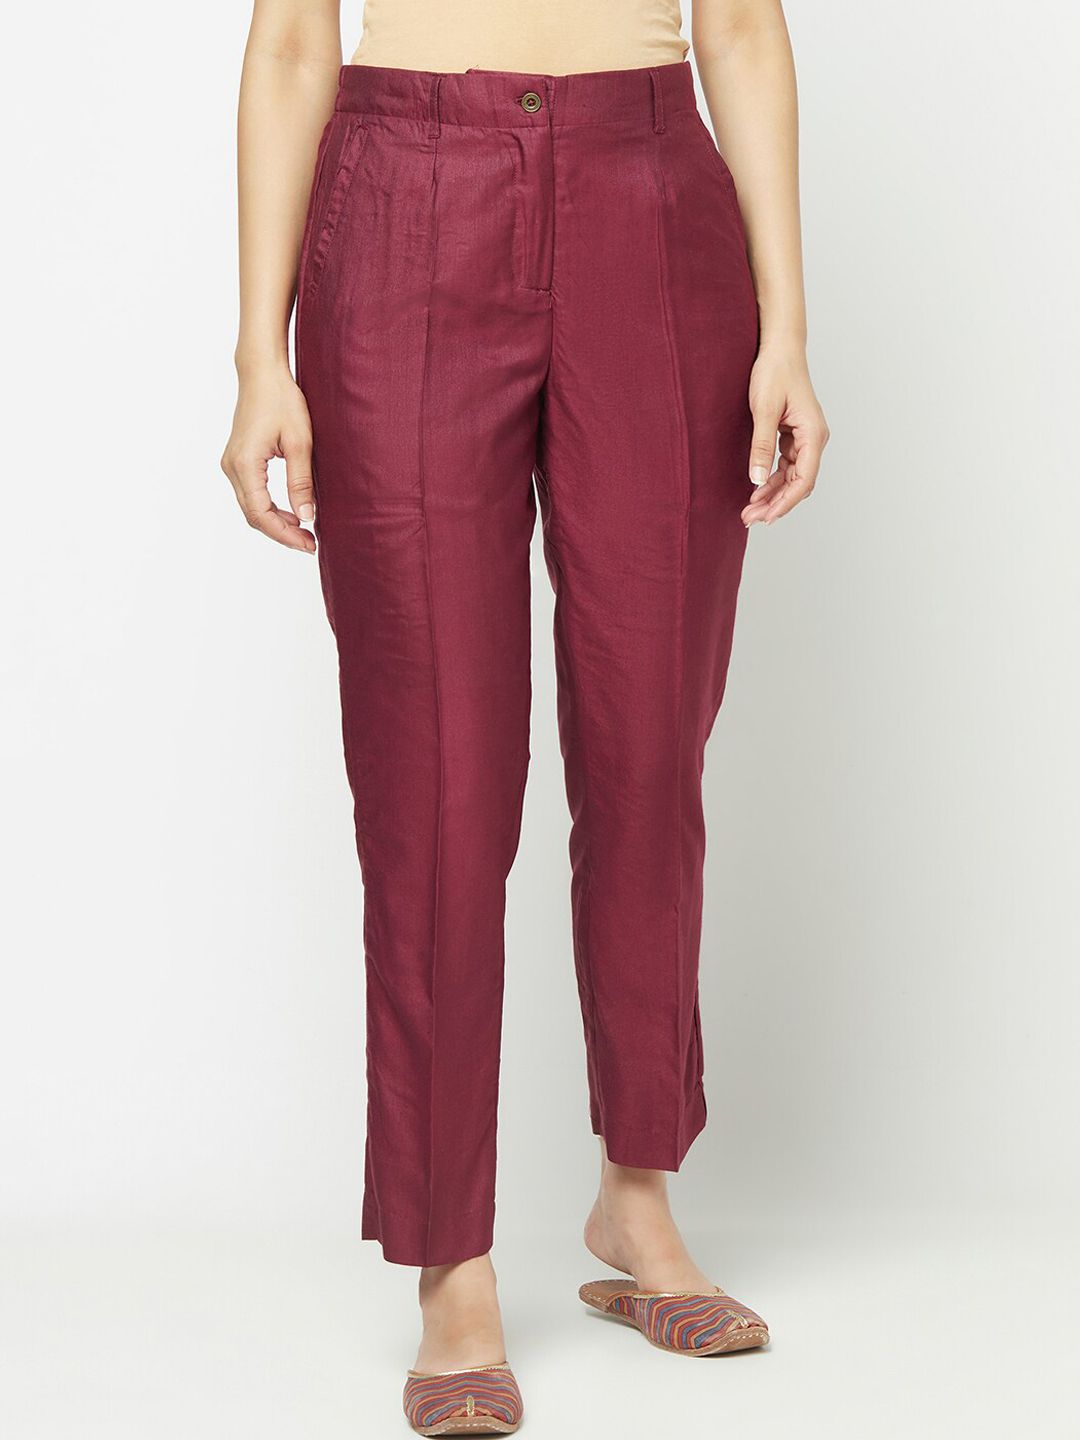 Fabindia Women Maroon Slim Fit Pleated Trousers Price in India